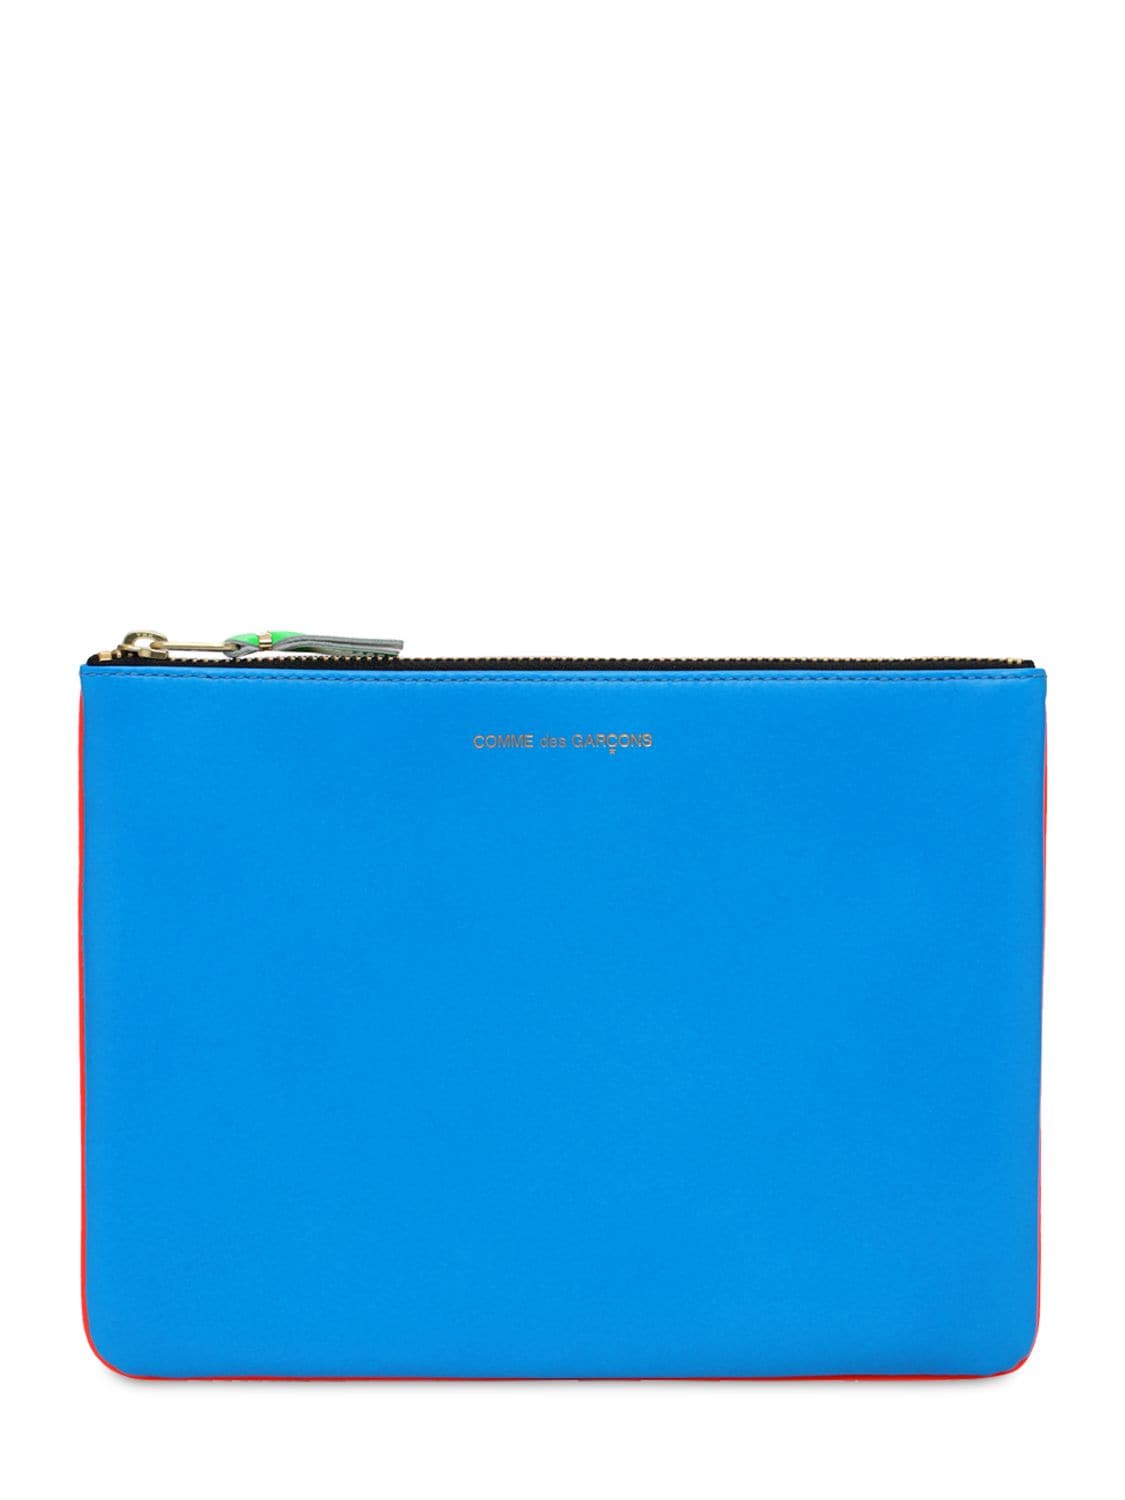 Image of Super Fluo Bi-color Leather Pouch